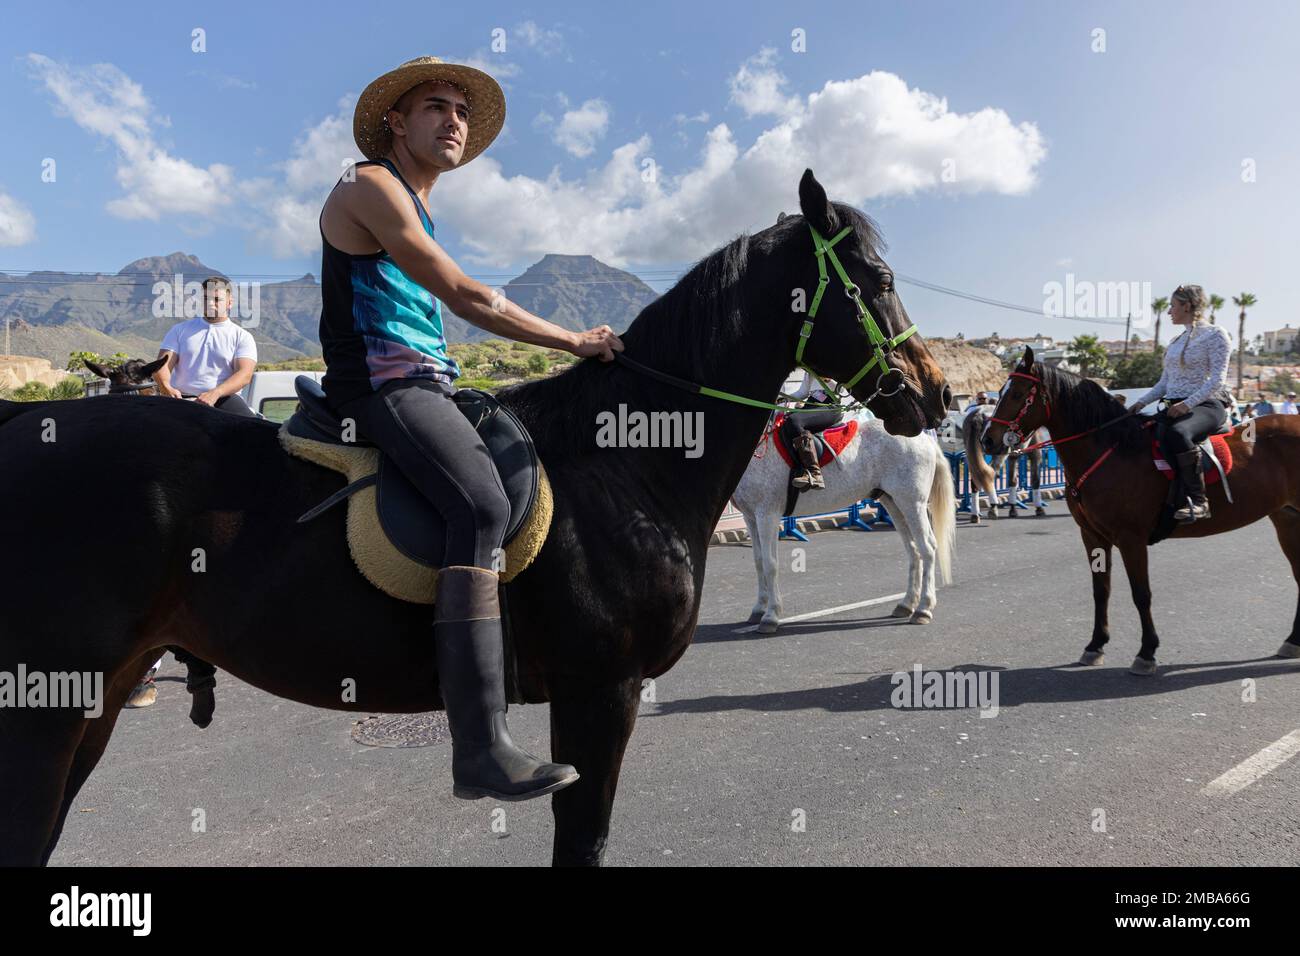 Costa Adeje, Tenerife, Canary Islands, 20 January 2023.A rider on horseback at the fiesta of San Sebastian which returns for the first time since 2020 due to the covid pandemic restrictions. The annual fiesta in La Caleta on the Costa Adeje is enjoyed by locals and tourists who gather to see the many horses that come to bathe in the sea at the Playa Enramada beach. Credit: Phil Crean A/Alamy Live News Stock Photo